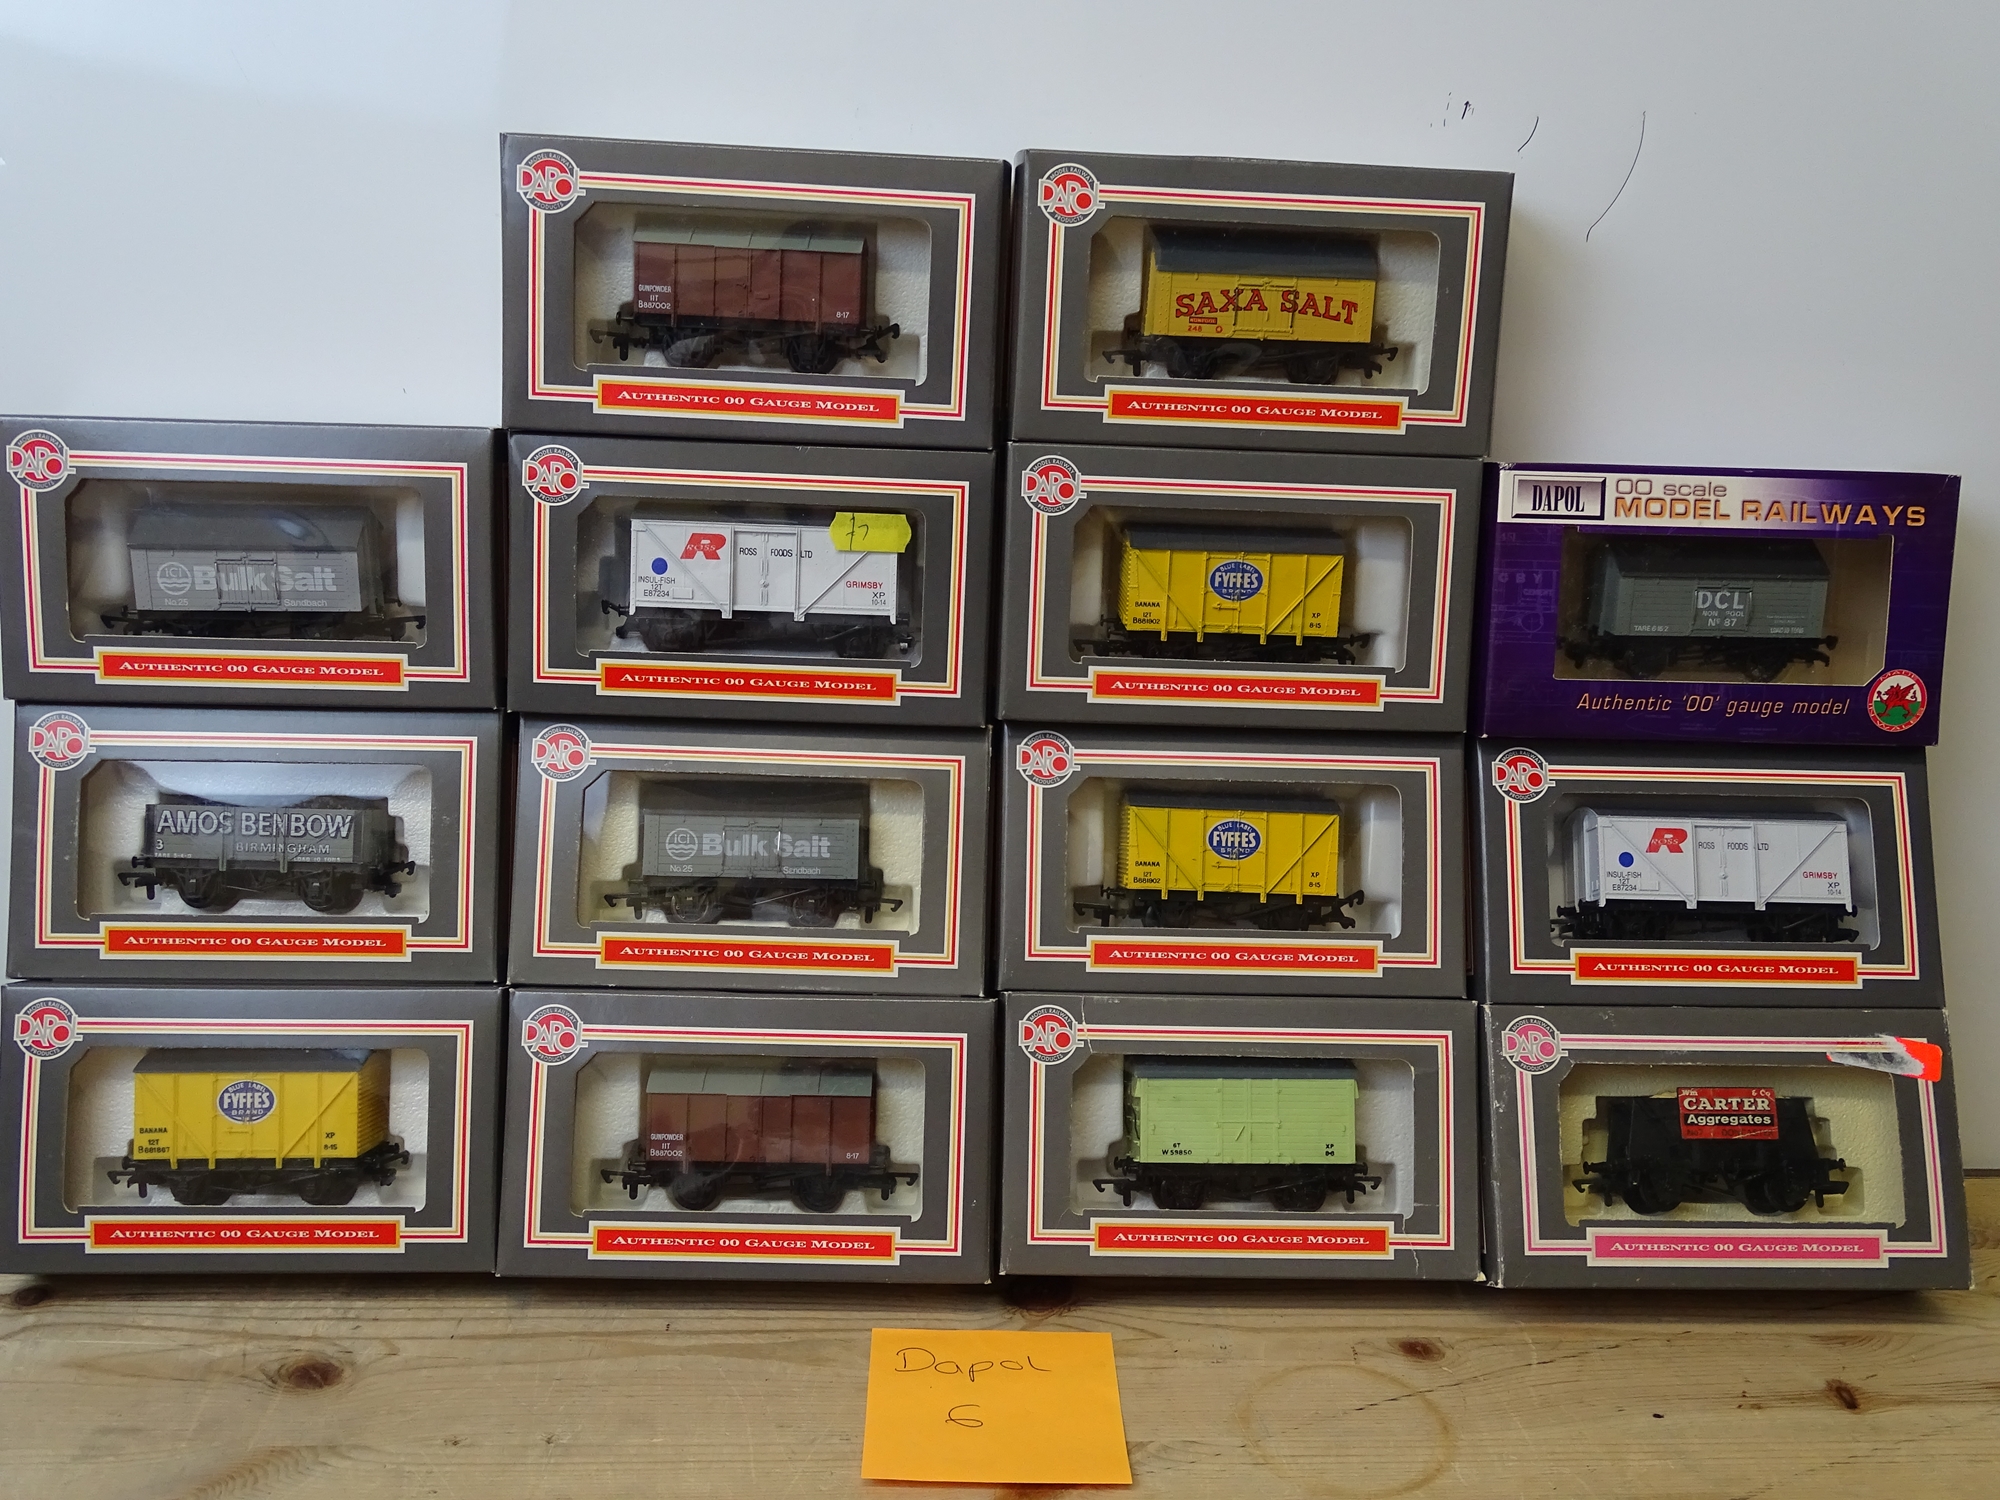 OO GAUGE MODEL RAILWAYS: A group of boxed DAPOL wagons - all ex-WRENN wagons in WR1 and WR3